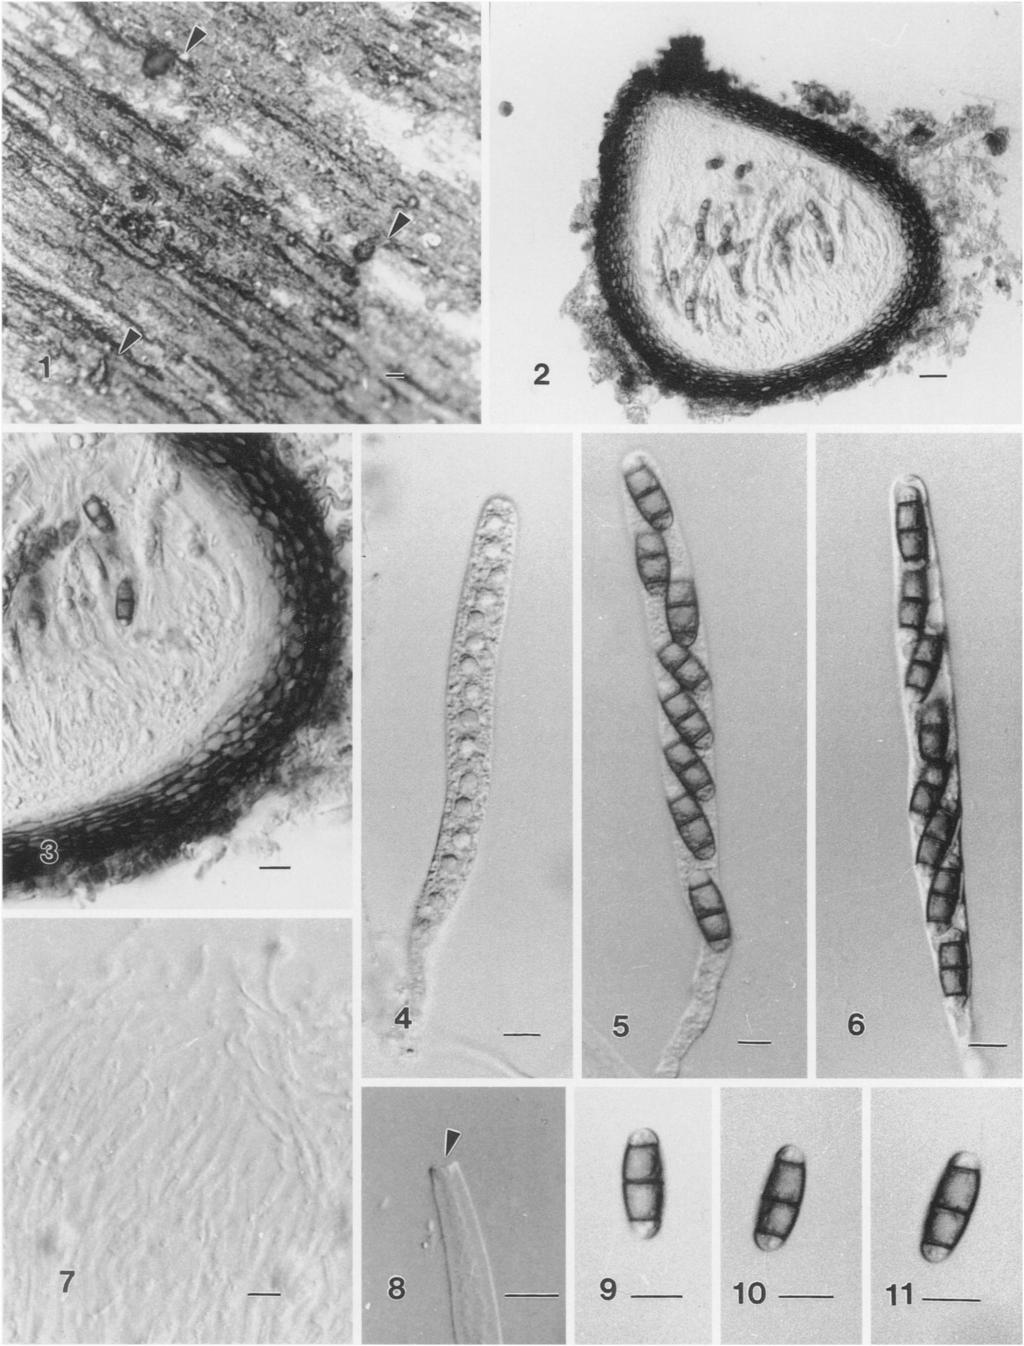 - RANGHOO AND HYDE: NEW ASCOMYCETES FROM FRESHWATER HABITATS 1057 ytyt. -1-. FIGS. 1-1 1. Ascolan'cola aquatica (from HKU (M) 5243). 1. Ascomata on wood (arrowed). 2. Section through ascoma. 3.